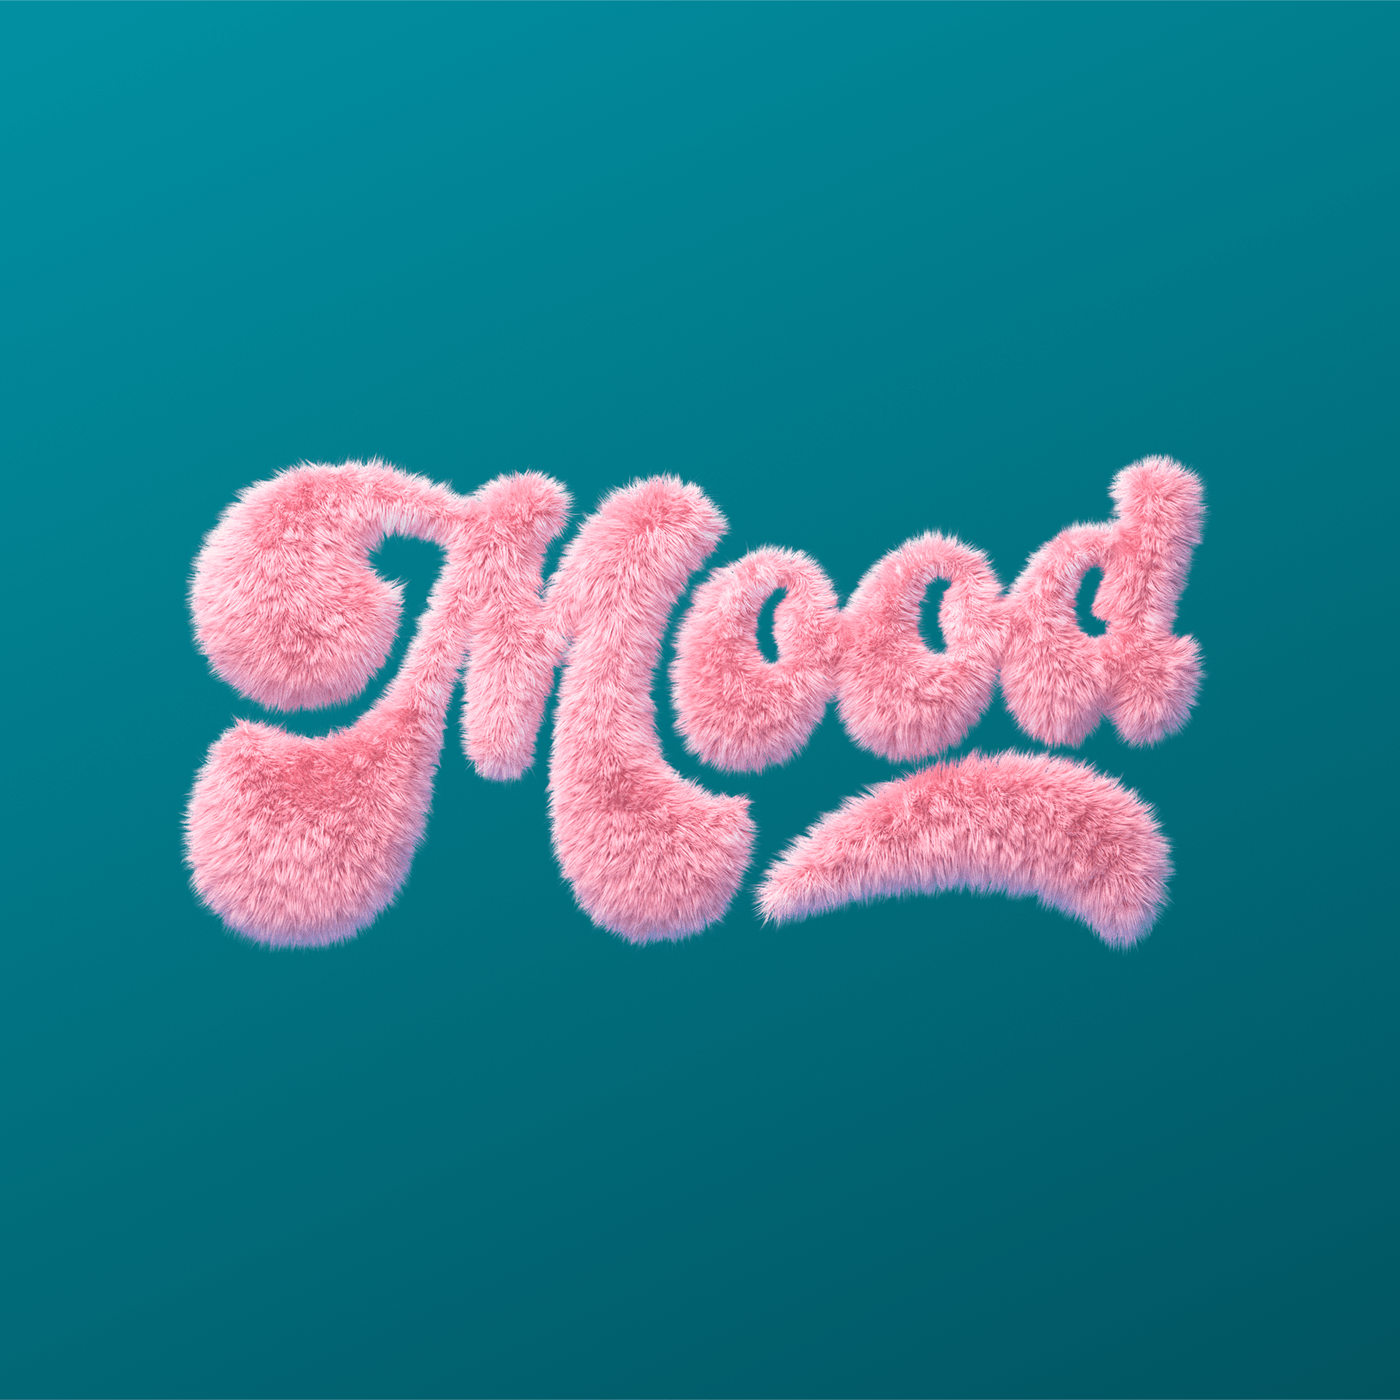 3D 3D typography after effects animation  CGI CGI LETTERING cinema 4d lettering motion graphics  Render